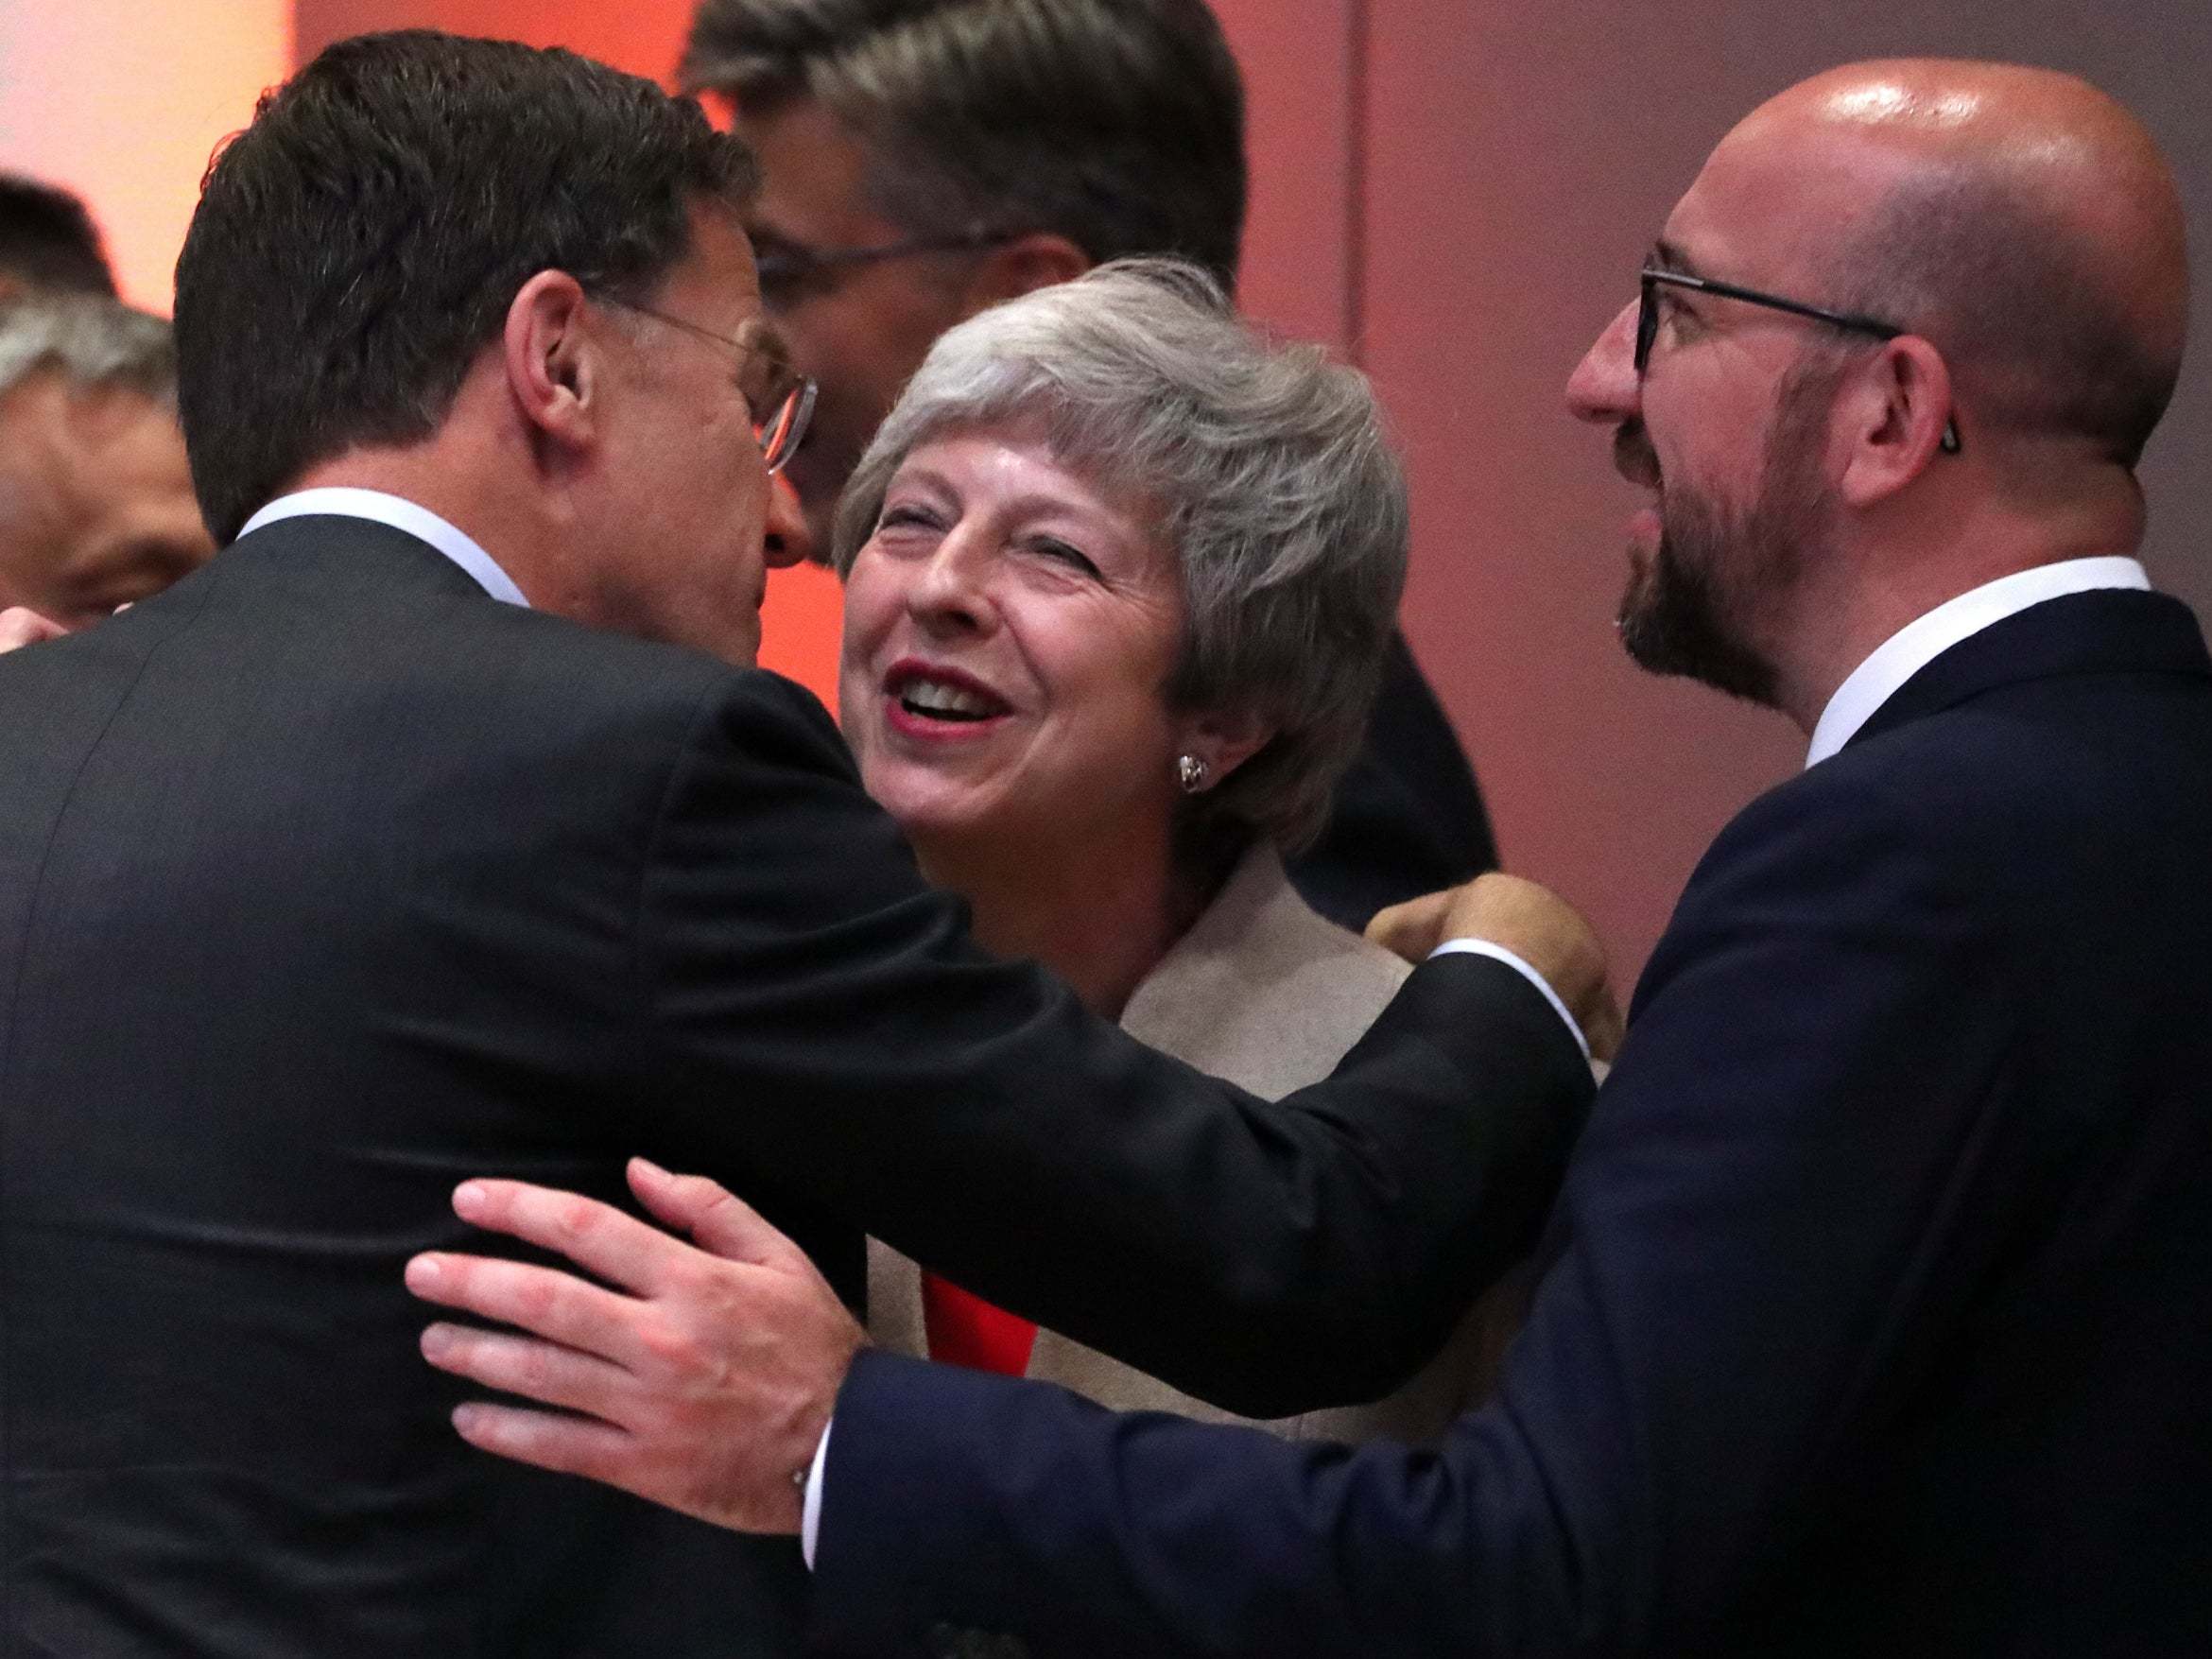 Dutch Prime Minister Mark Rutte and Belgian prime minister Charles Michel greet Theresa May at the European Council summit